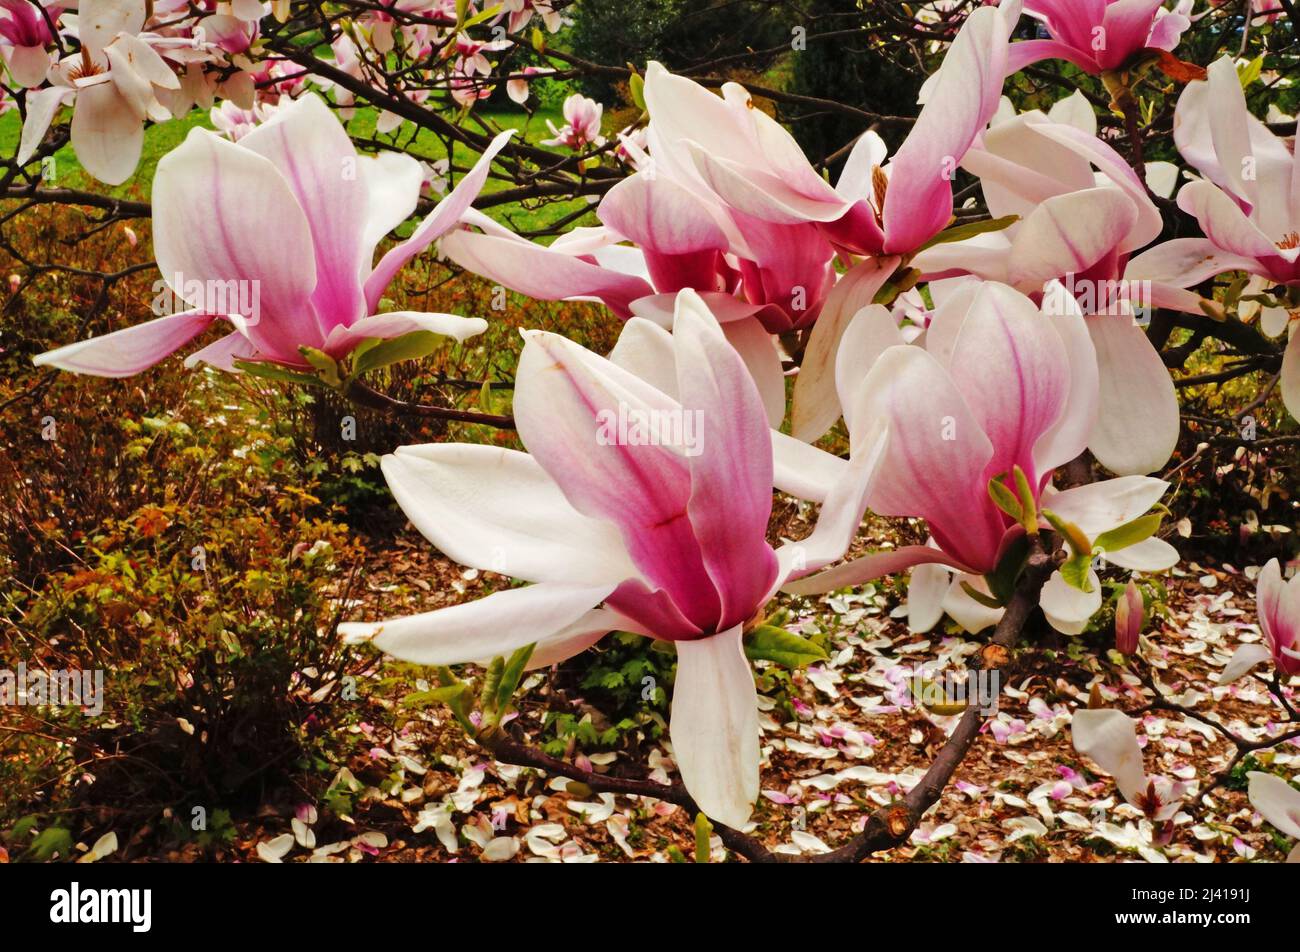 Magnolia branch with large flowers and buds with pinkish-white petals on a tree in the park on a spring day Stock Photo